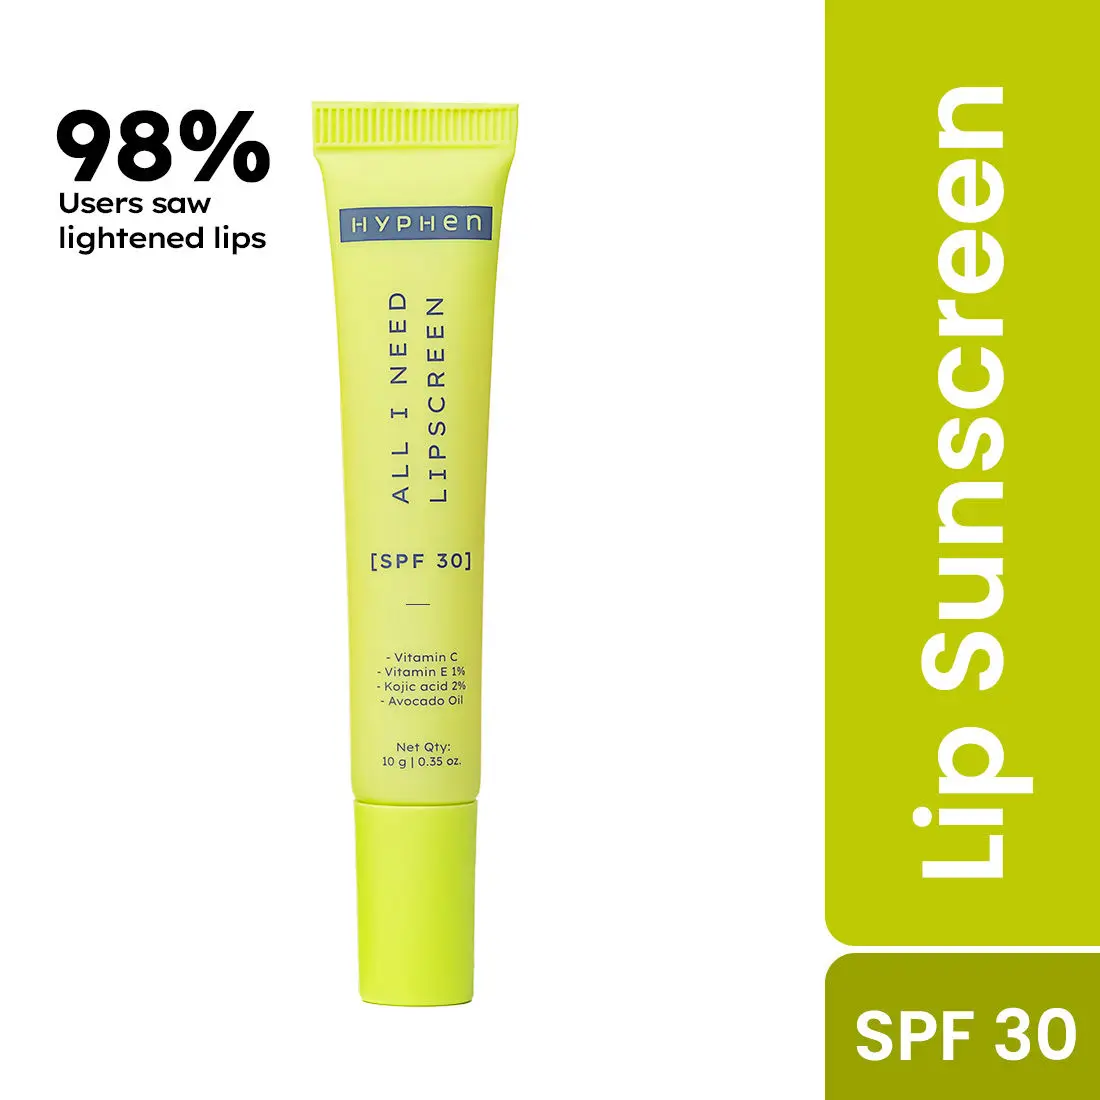 Hyphen All I Need Lipscreen SPF 30 with 2% Kojic Acid for Moisturization & Sun Protection | Hydrating Lip Balm for Reducing Pigmentation 10 gm